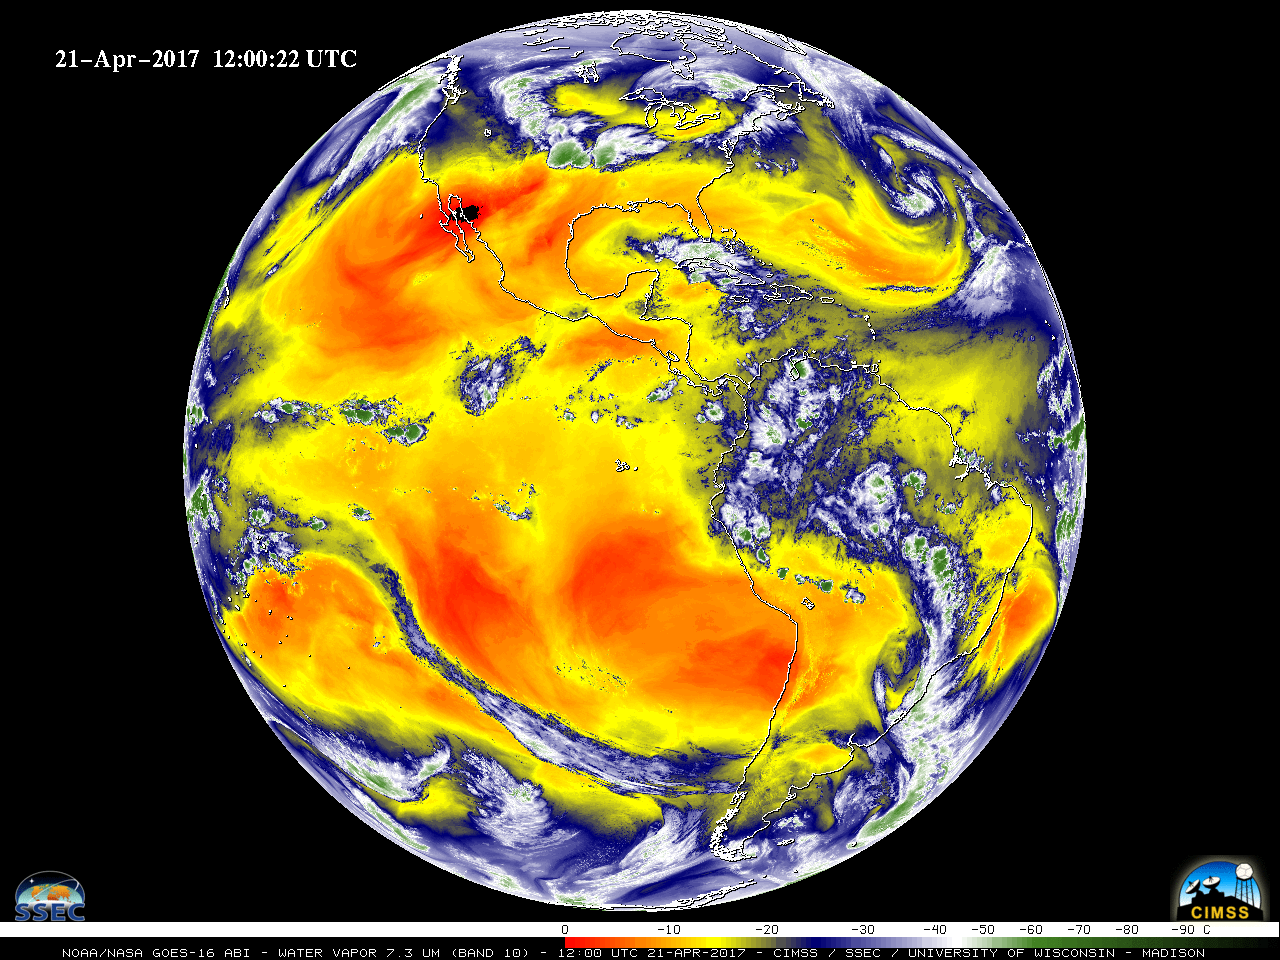 GOES-16 Lower-Level Water Vapor (7.3 µm) images [click to play animation]